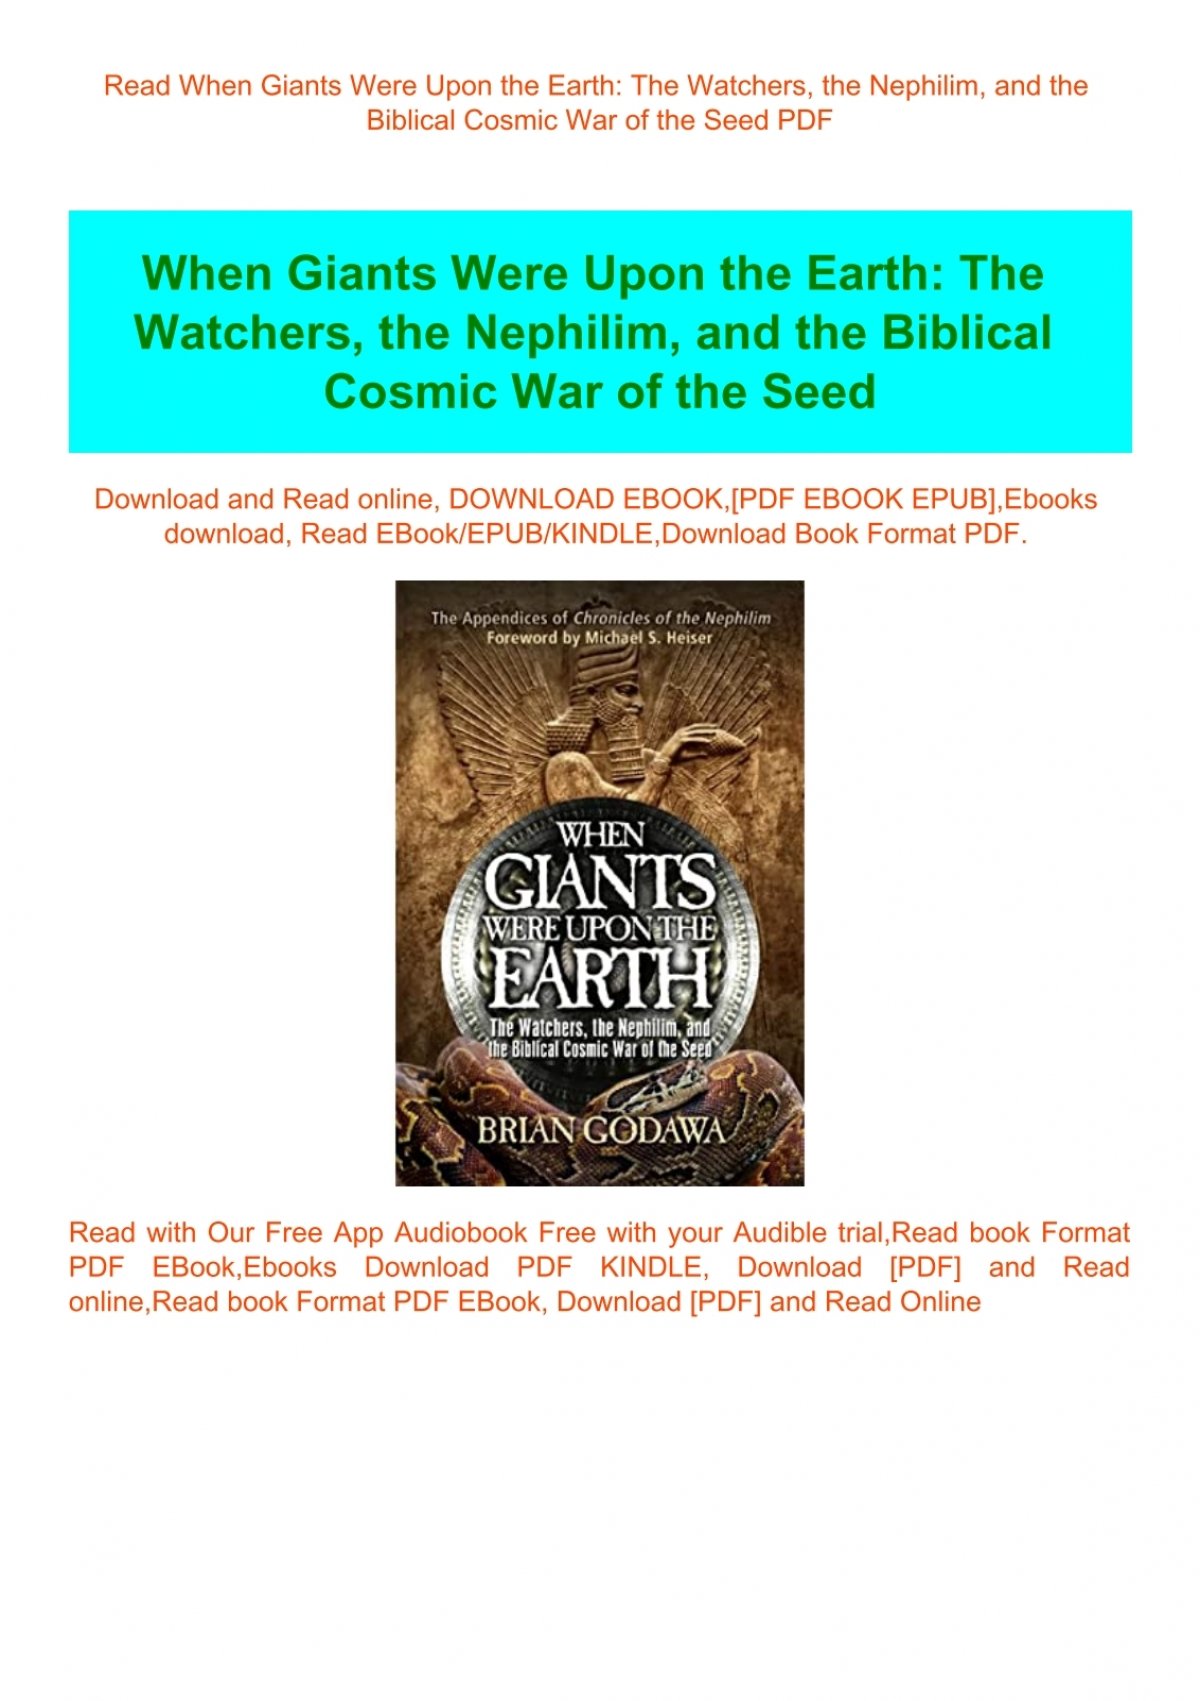 Read When Giants Were Upon The Earth The Watchers The Nephilim And The Biblical Cosmic War Of The Seed Pdf